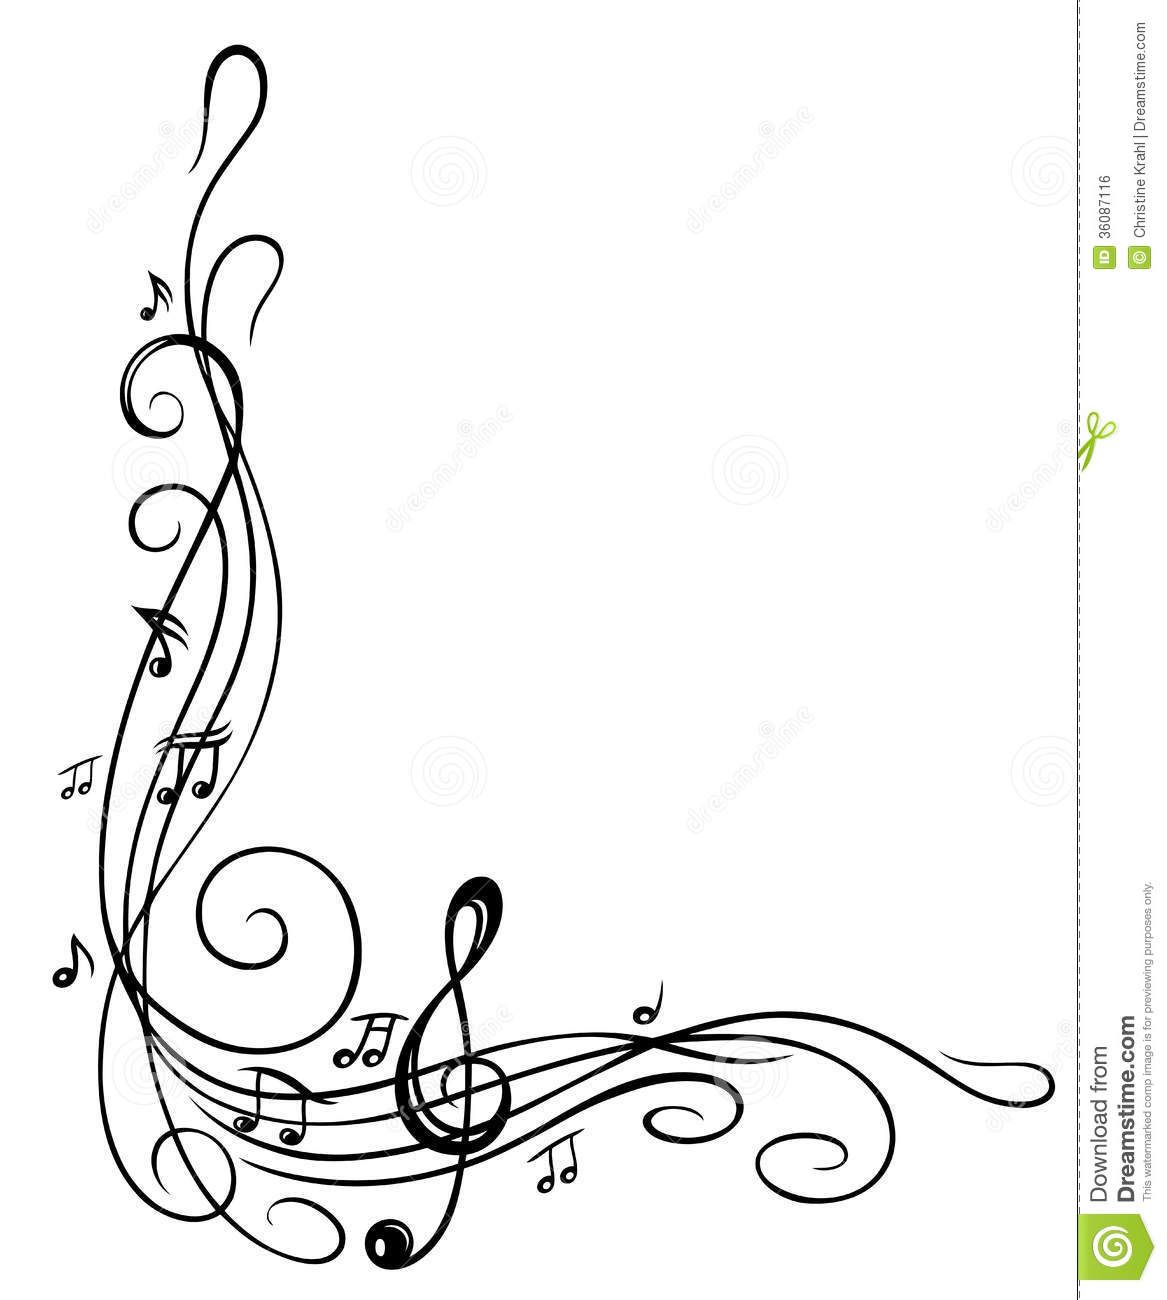 Pix for notes a. Clipart music border design